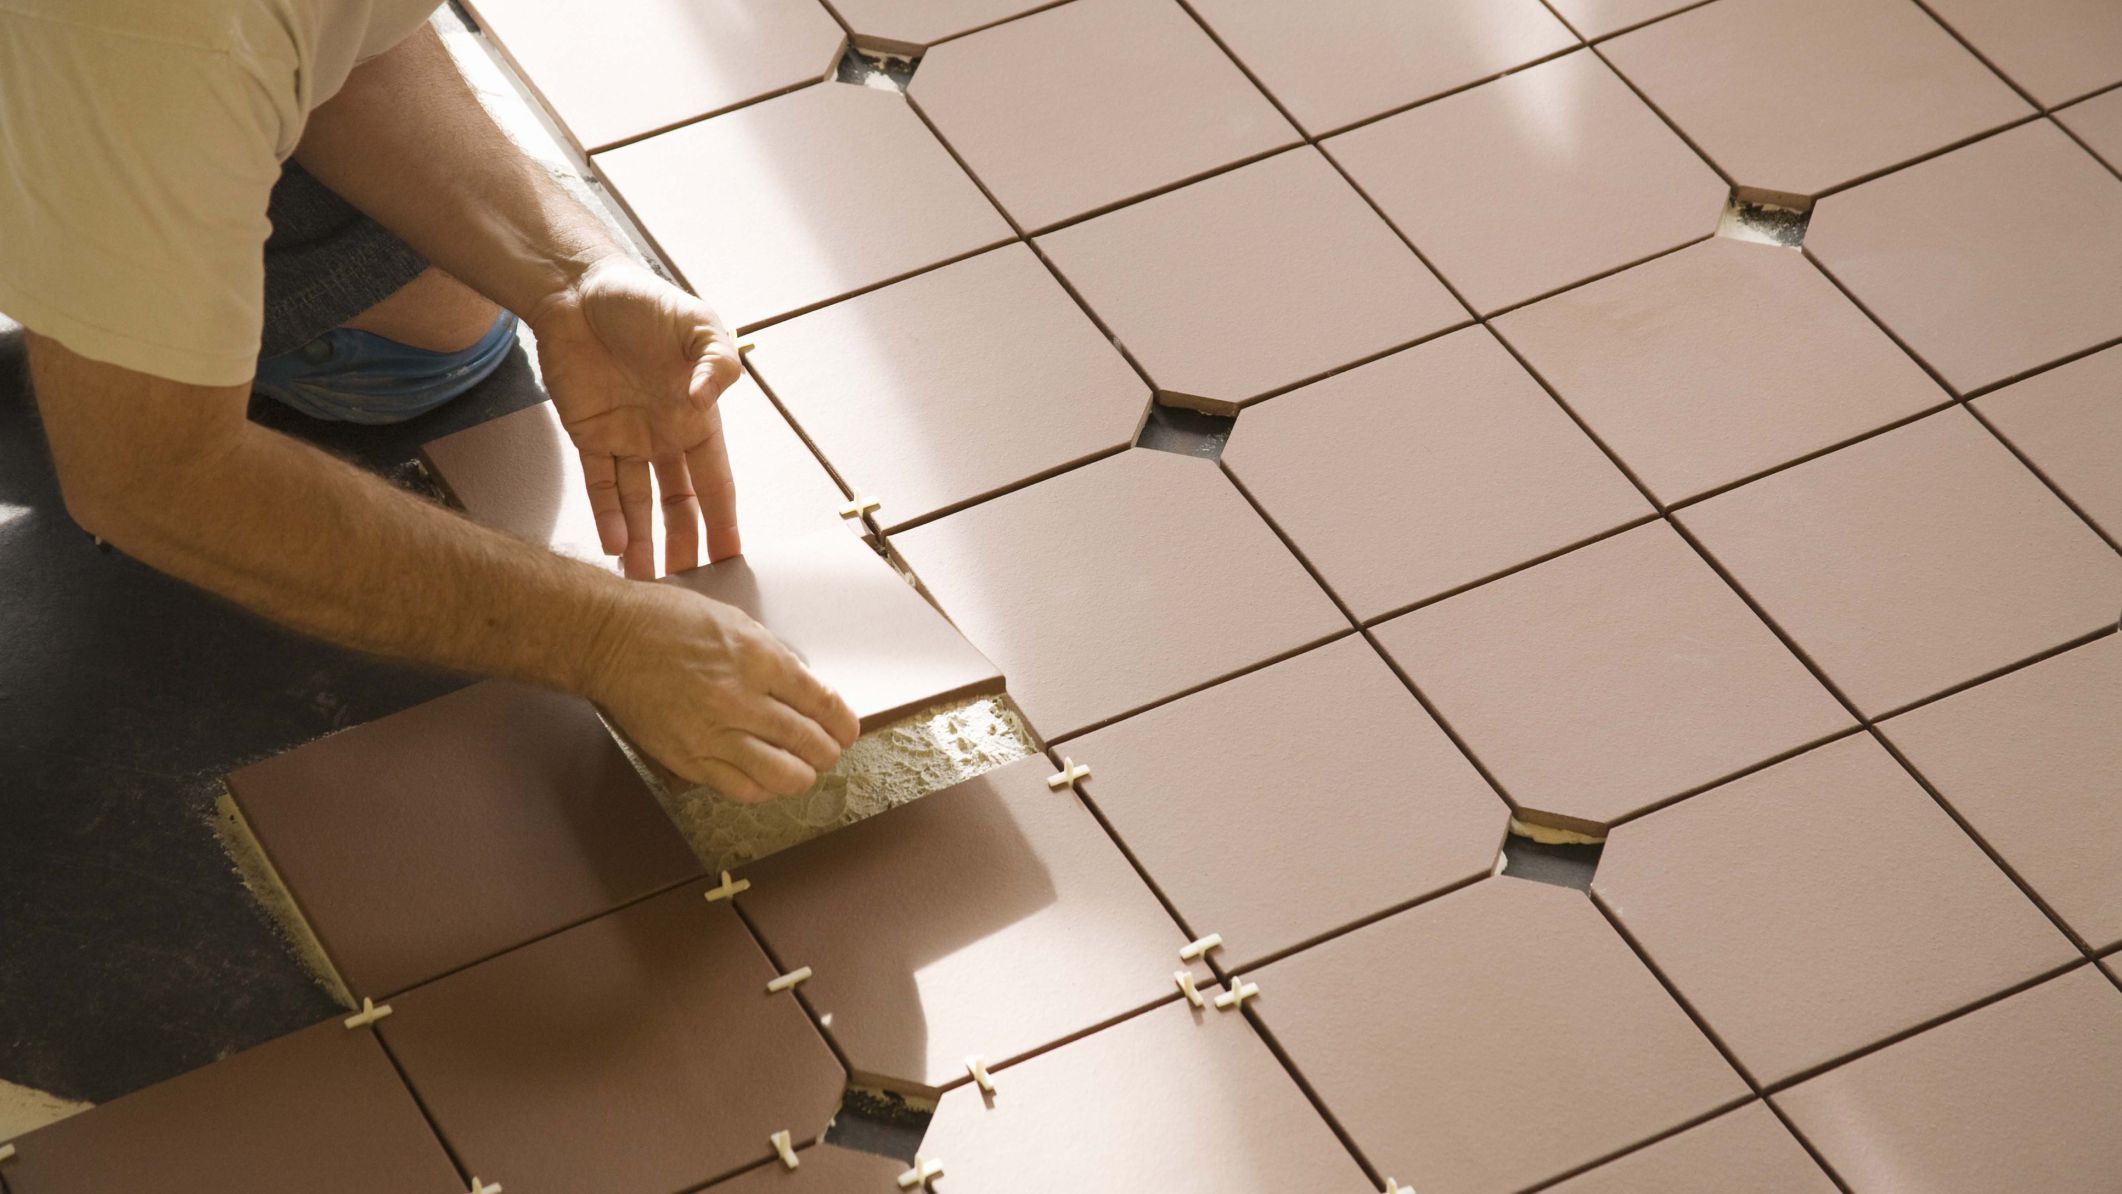 How to Install Tiles Properly